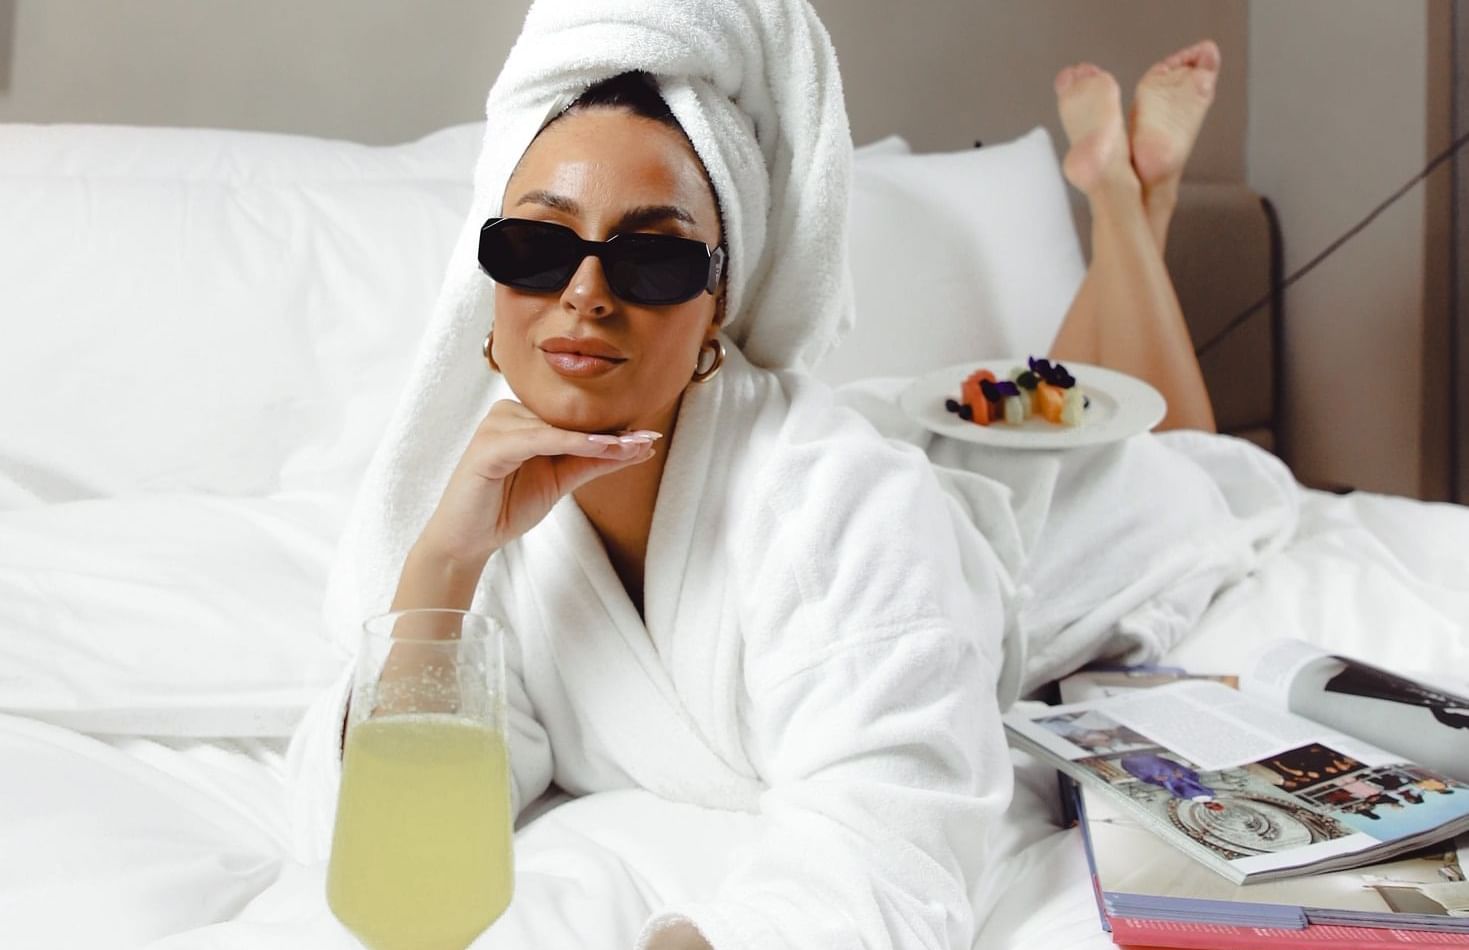 Lady posing for a picture in a bathrobe and having juice on the bed at The Londoner